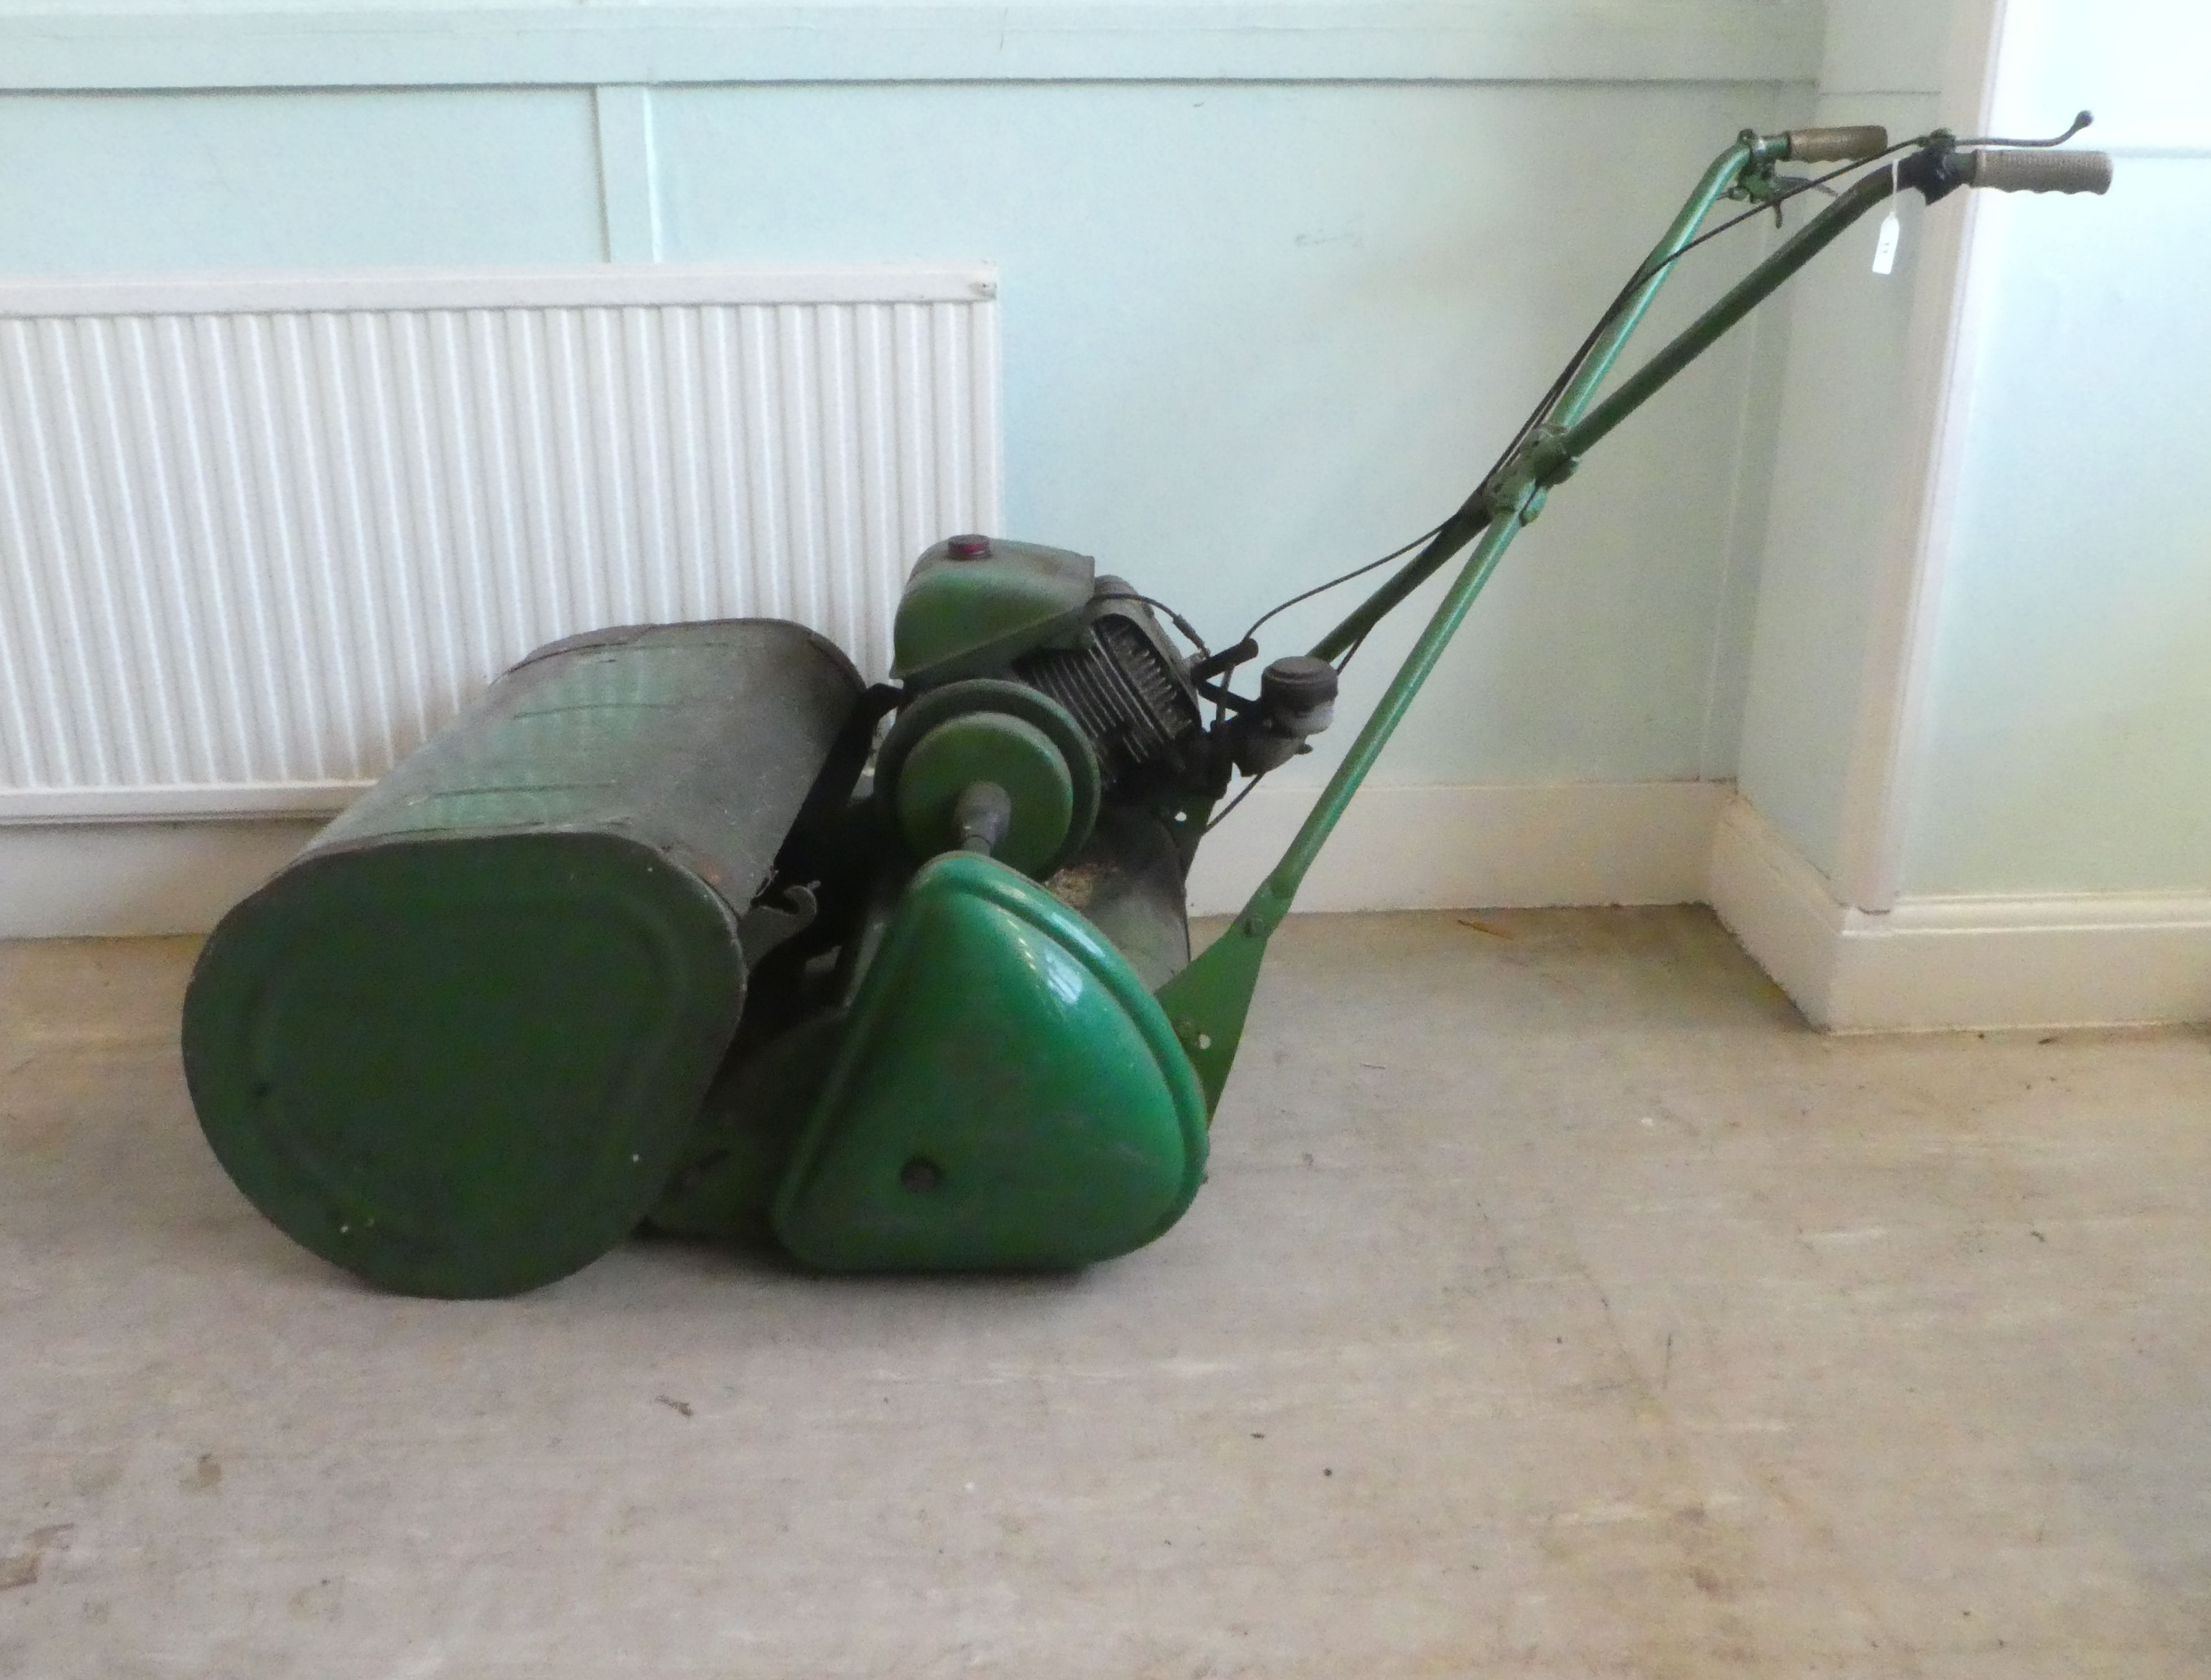 A vintage petrol driven cylindrical lawn mower with a grass box